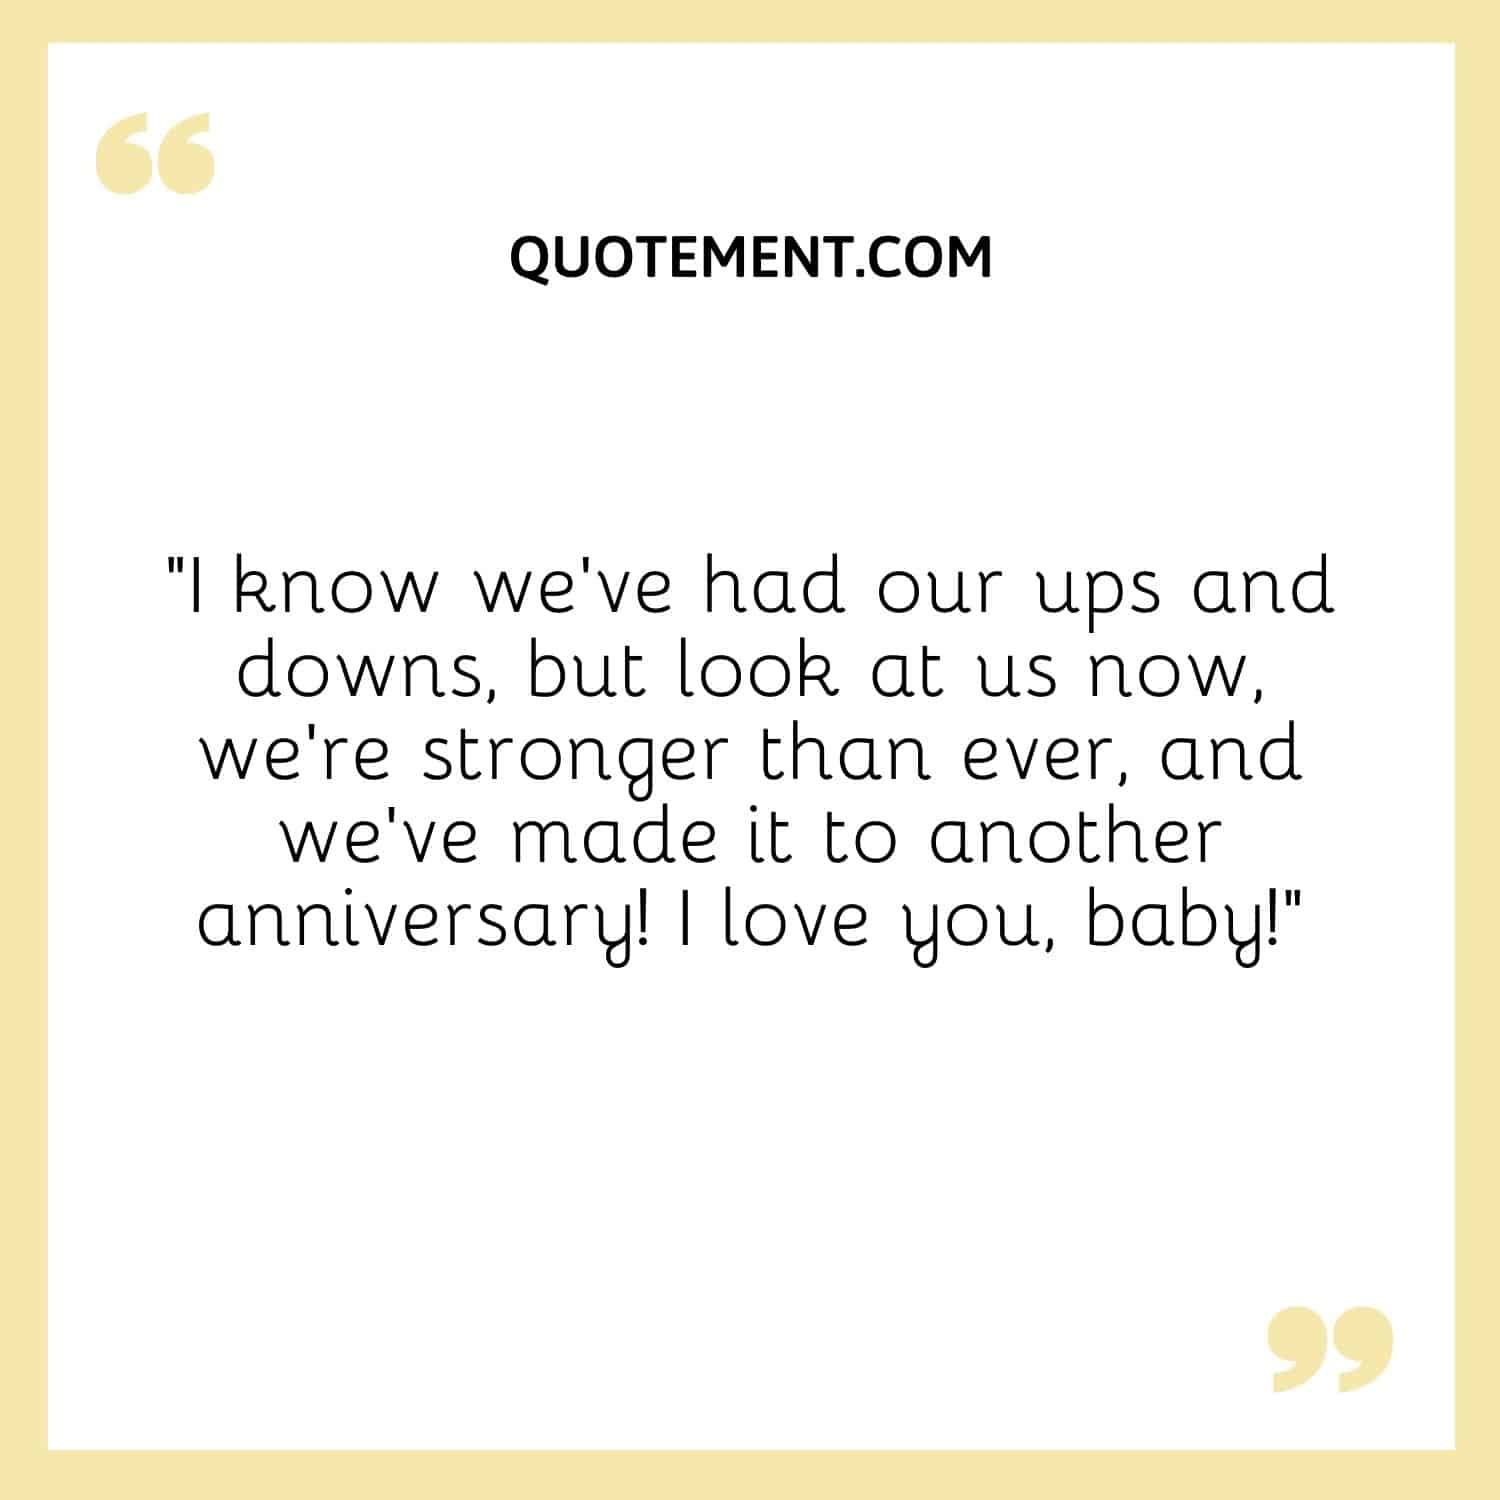 “I know we’ve had our ups and downs, but look at us now, we’re stronger than ever, and we’ve made it to another anniversary! I love you, baby!”